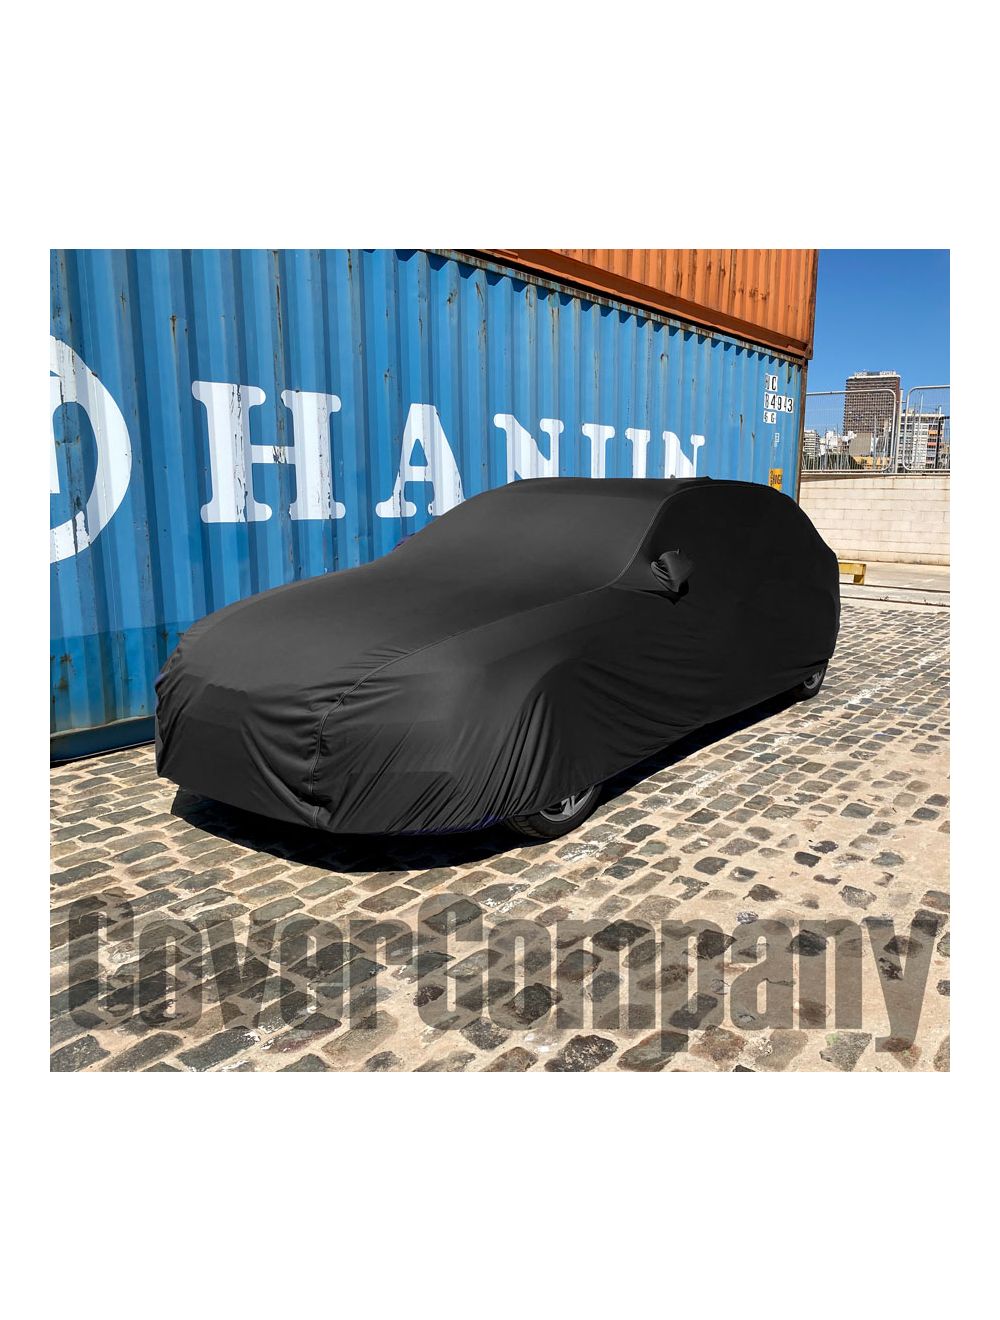 All Weather SUV Car Cover Waterproof Outdoor UV Rain Snow Protection  Accessories